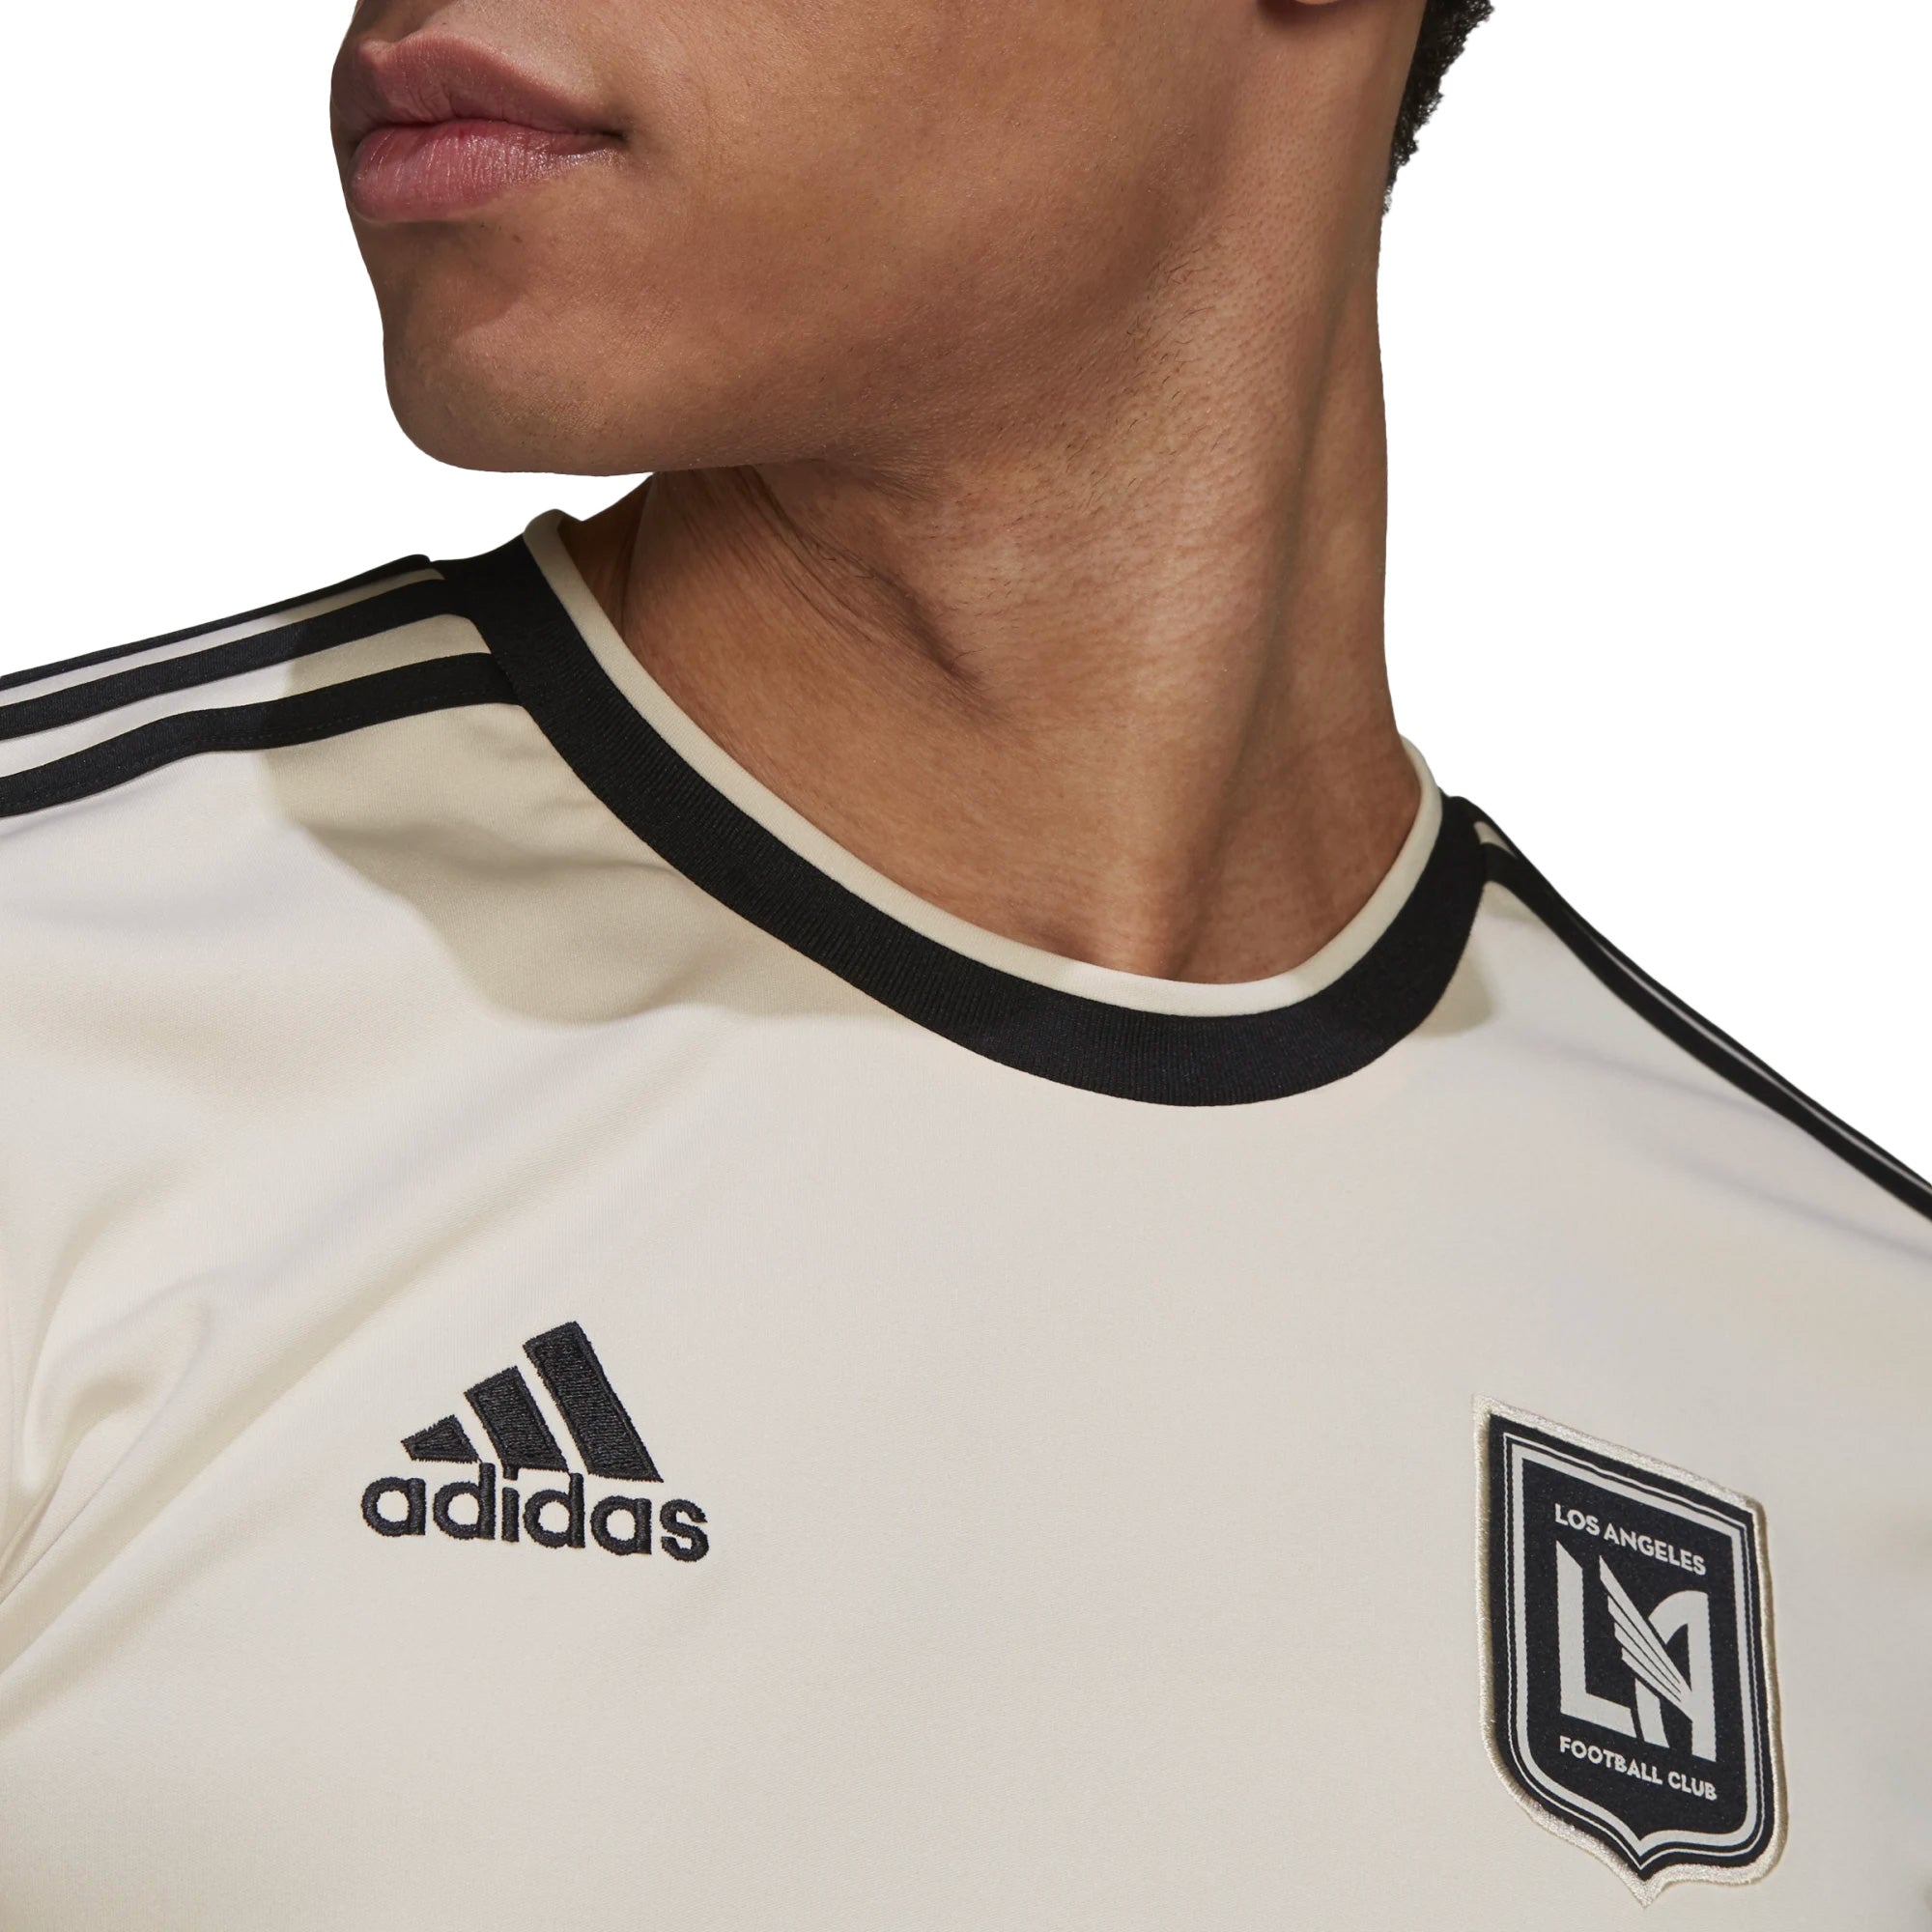 Adidas Los Angeles Football Club (LAFC) You Tube MLS Soccer Jersey Mens  Size S